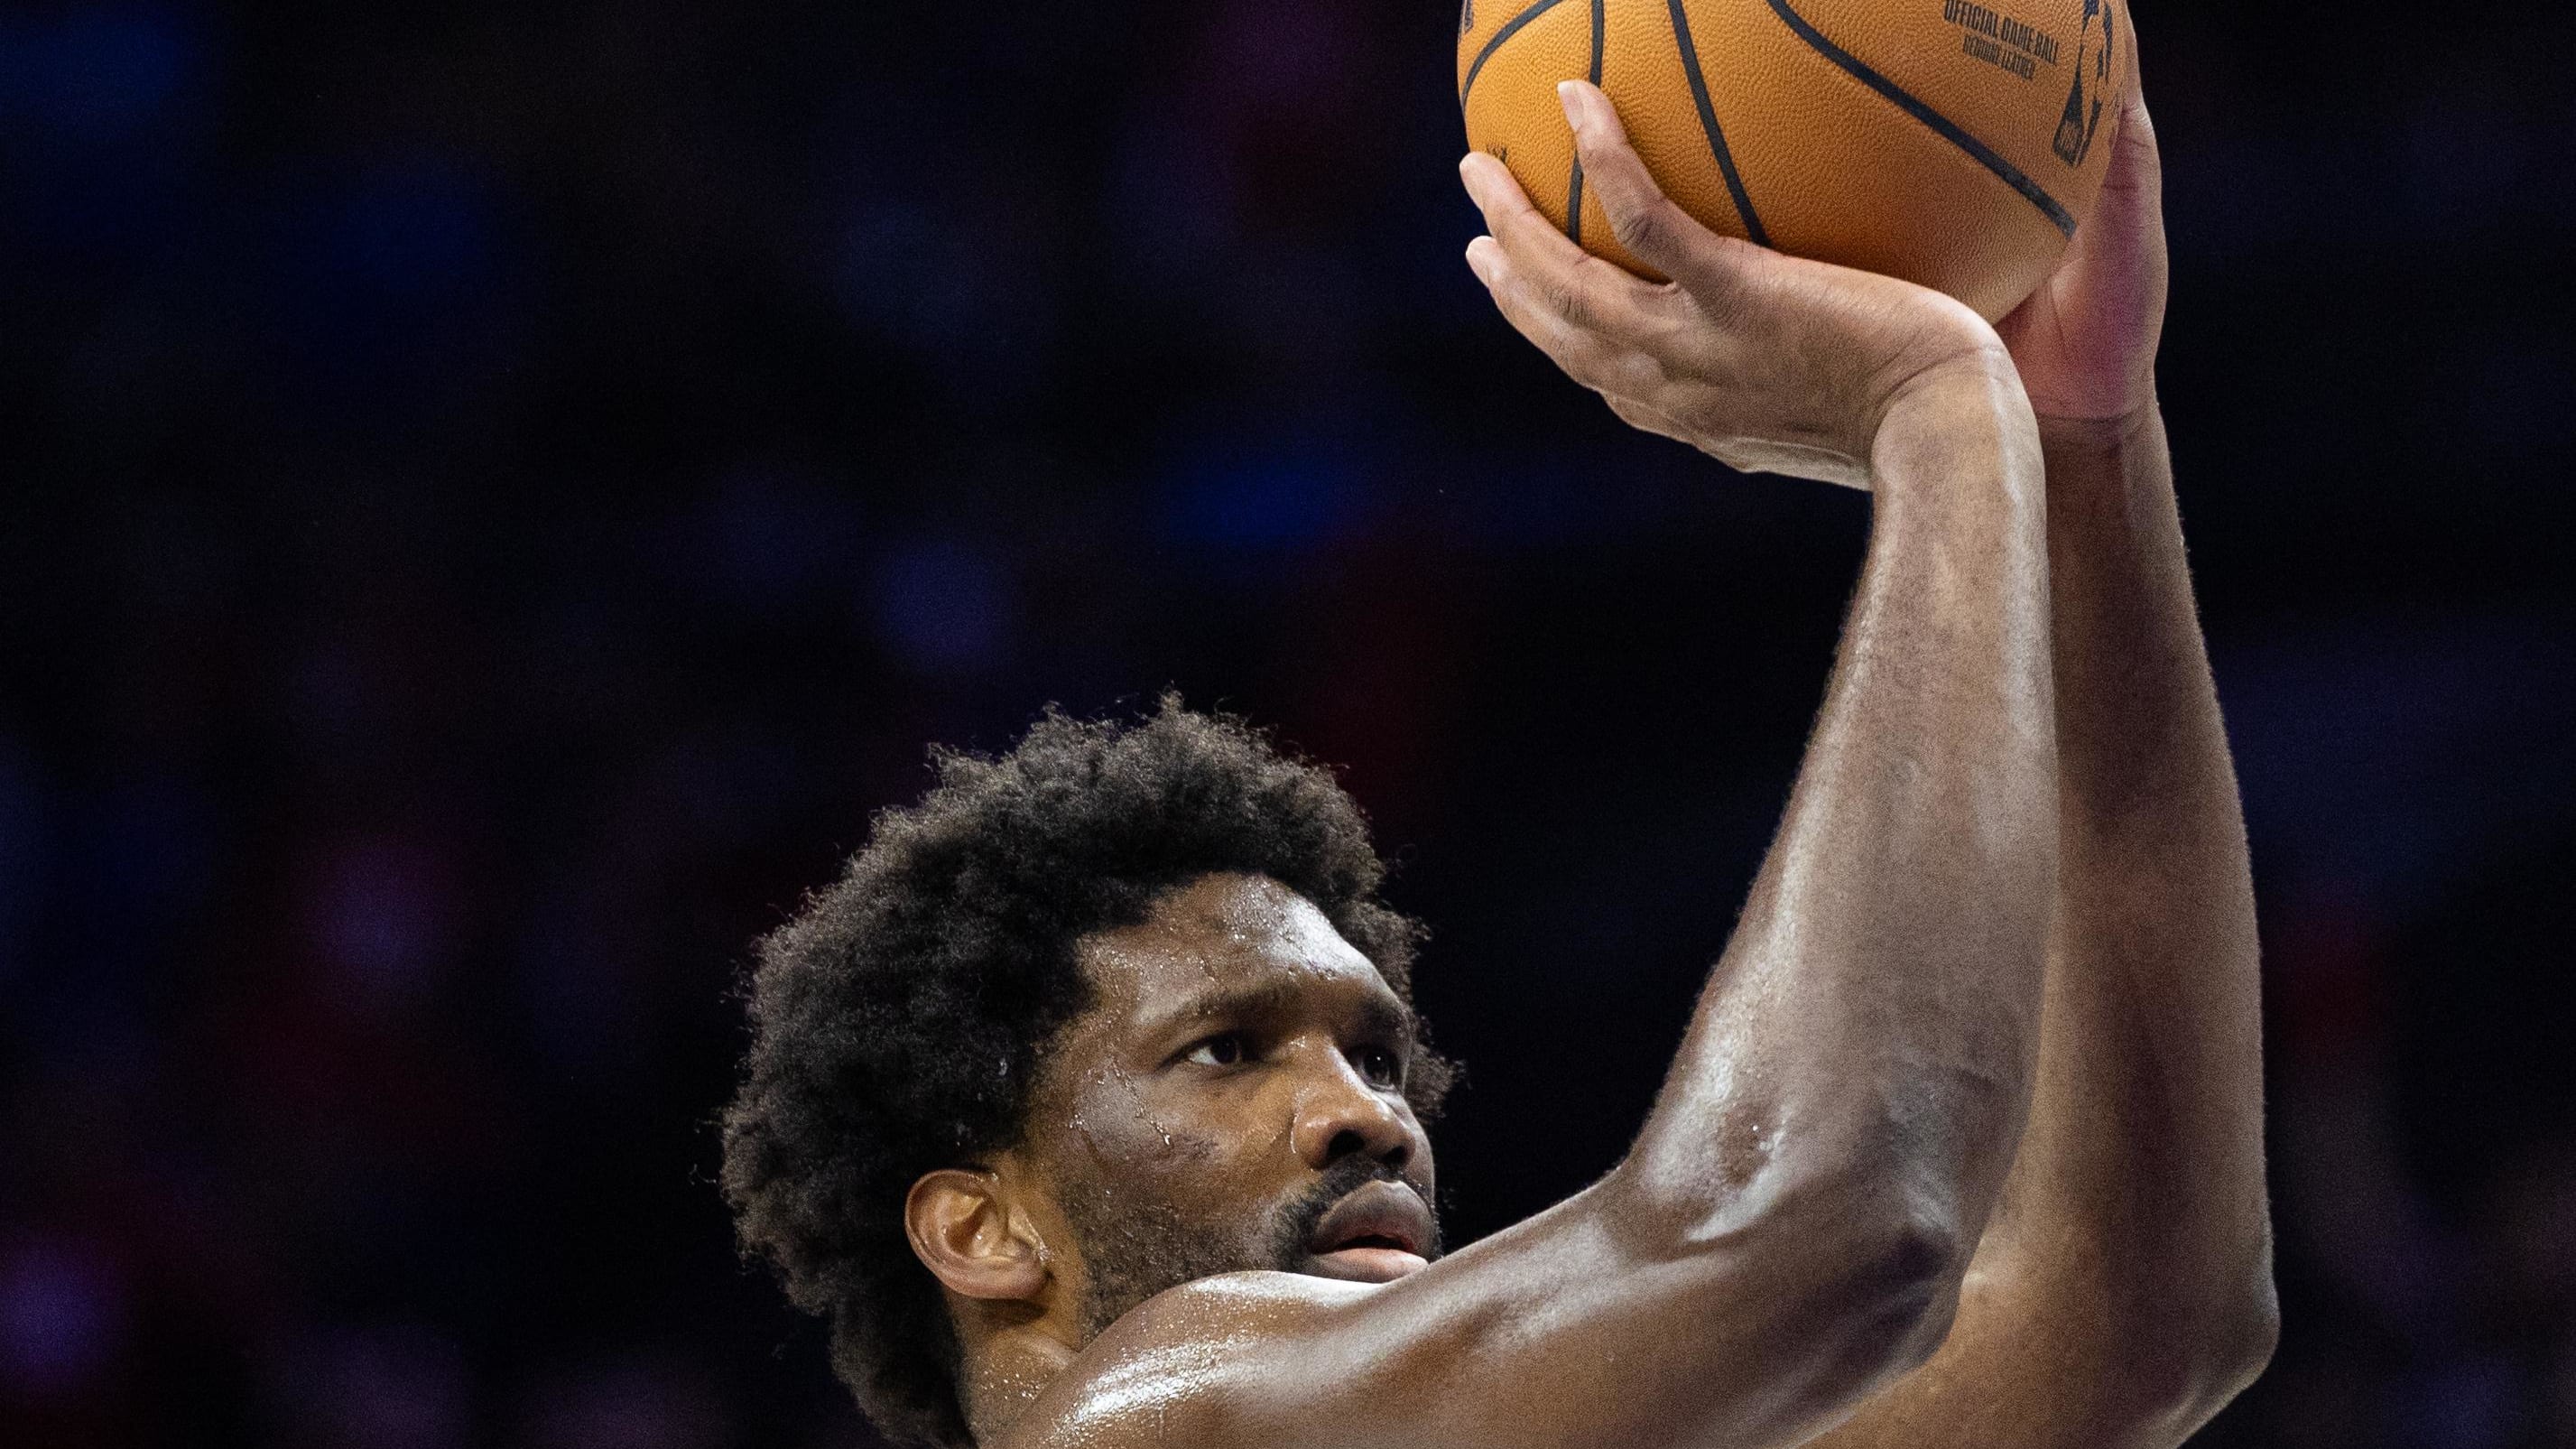 Joel Embiid Battles Knee Injury and Bell’s Palsy During Playoff Run, Remains Committed to his Game